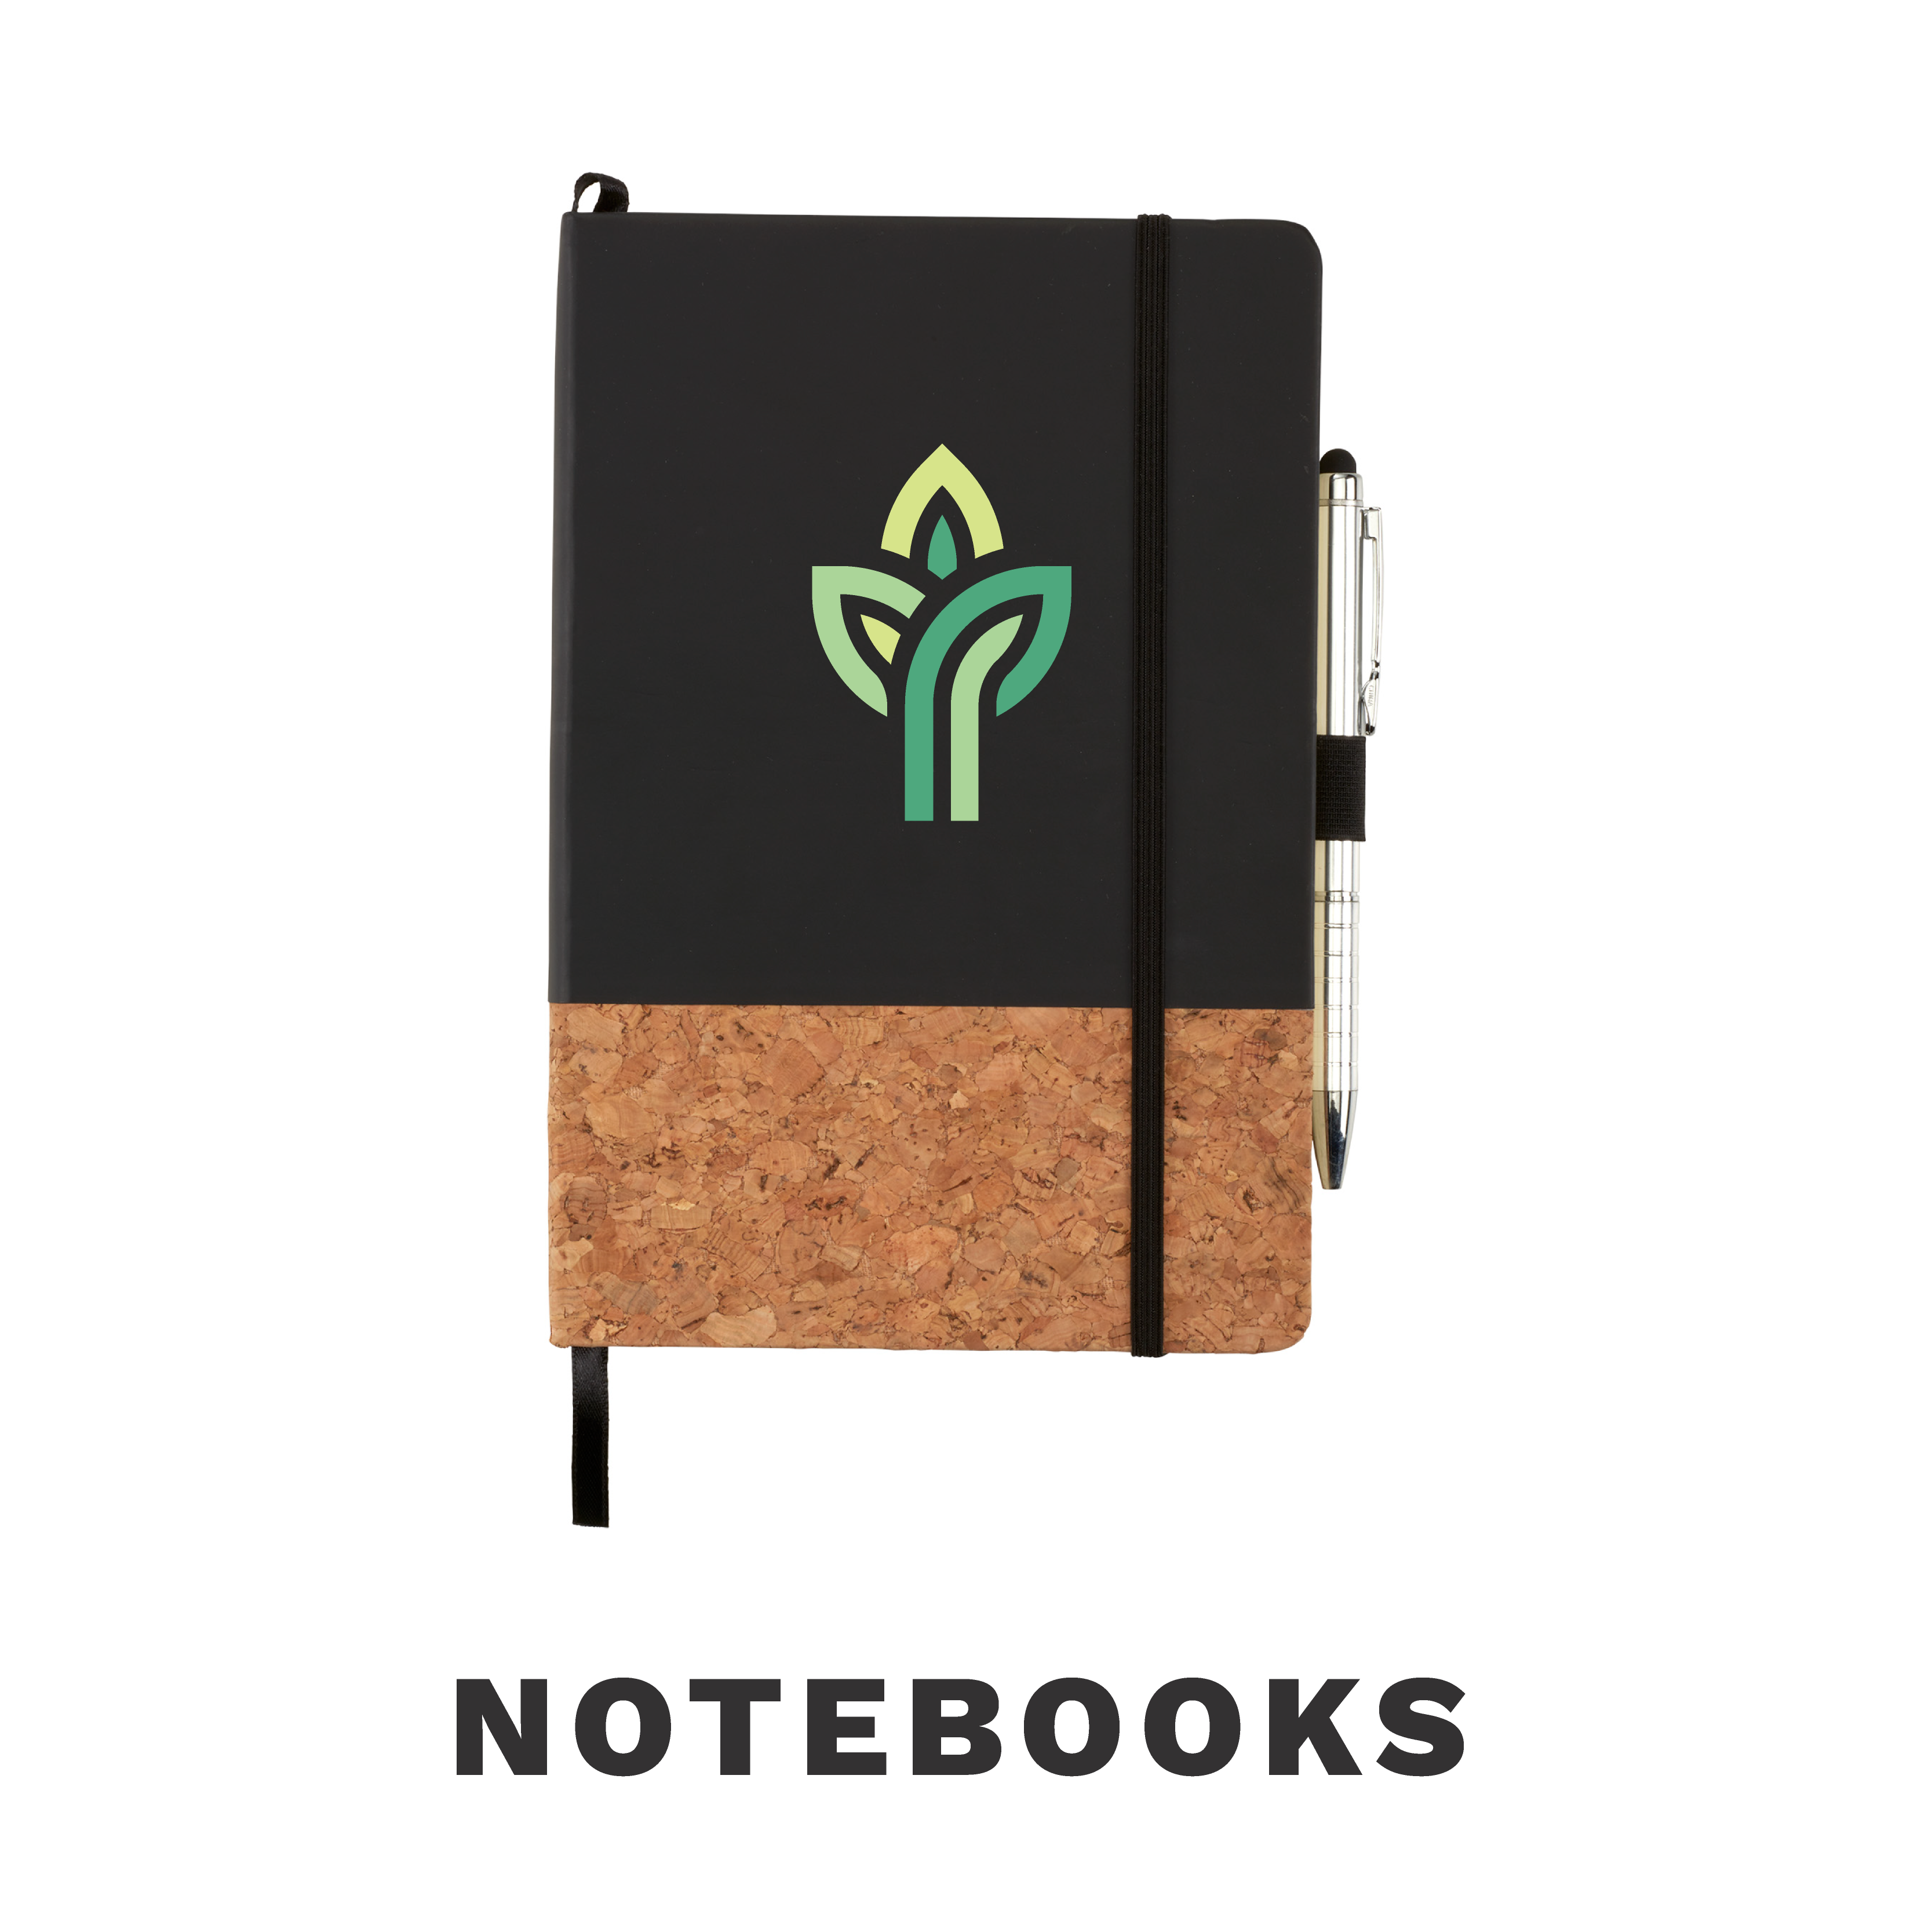 Your brand notebook